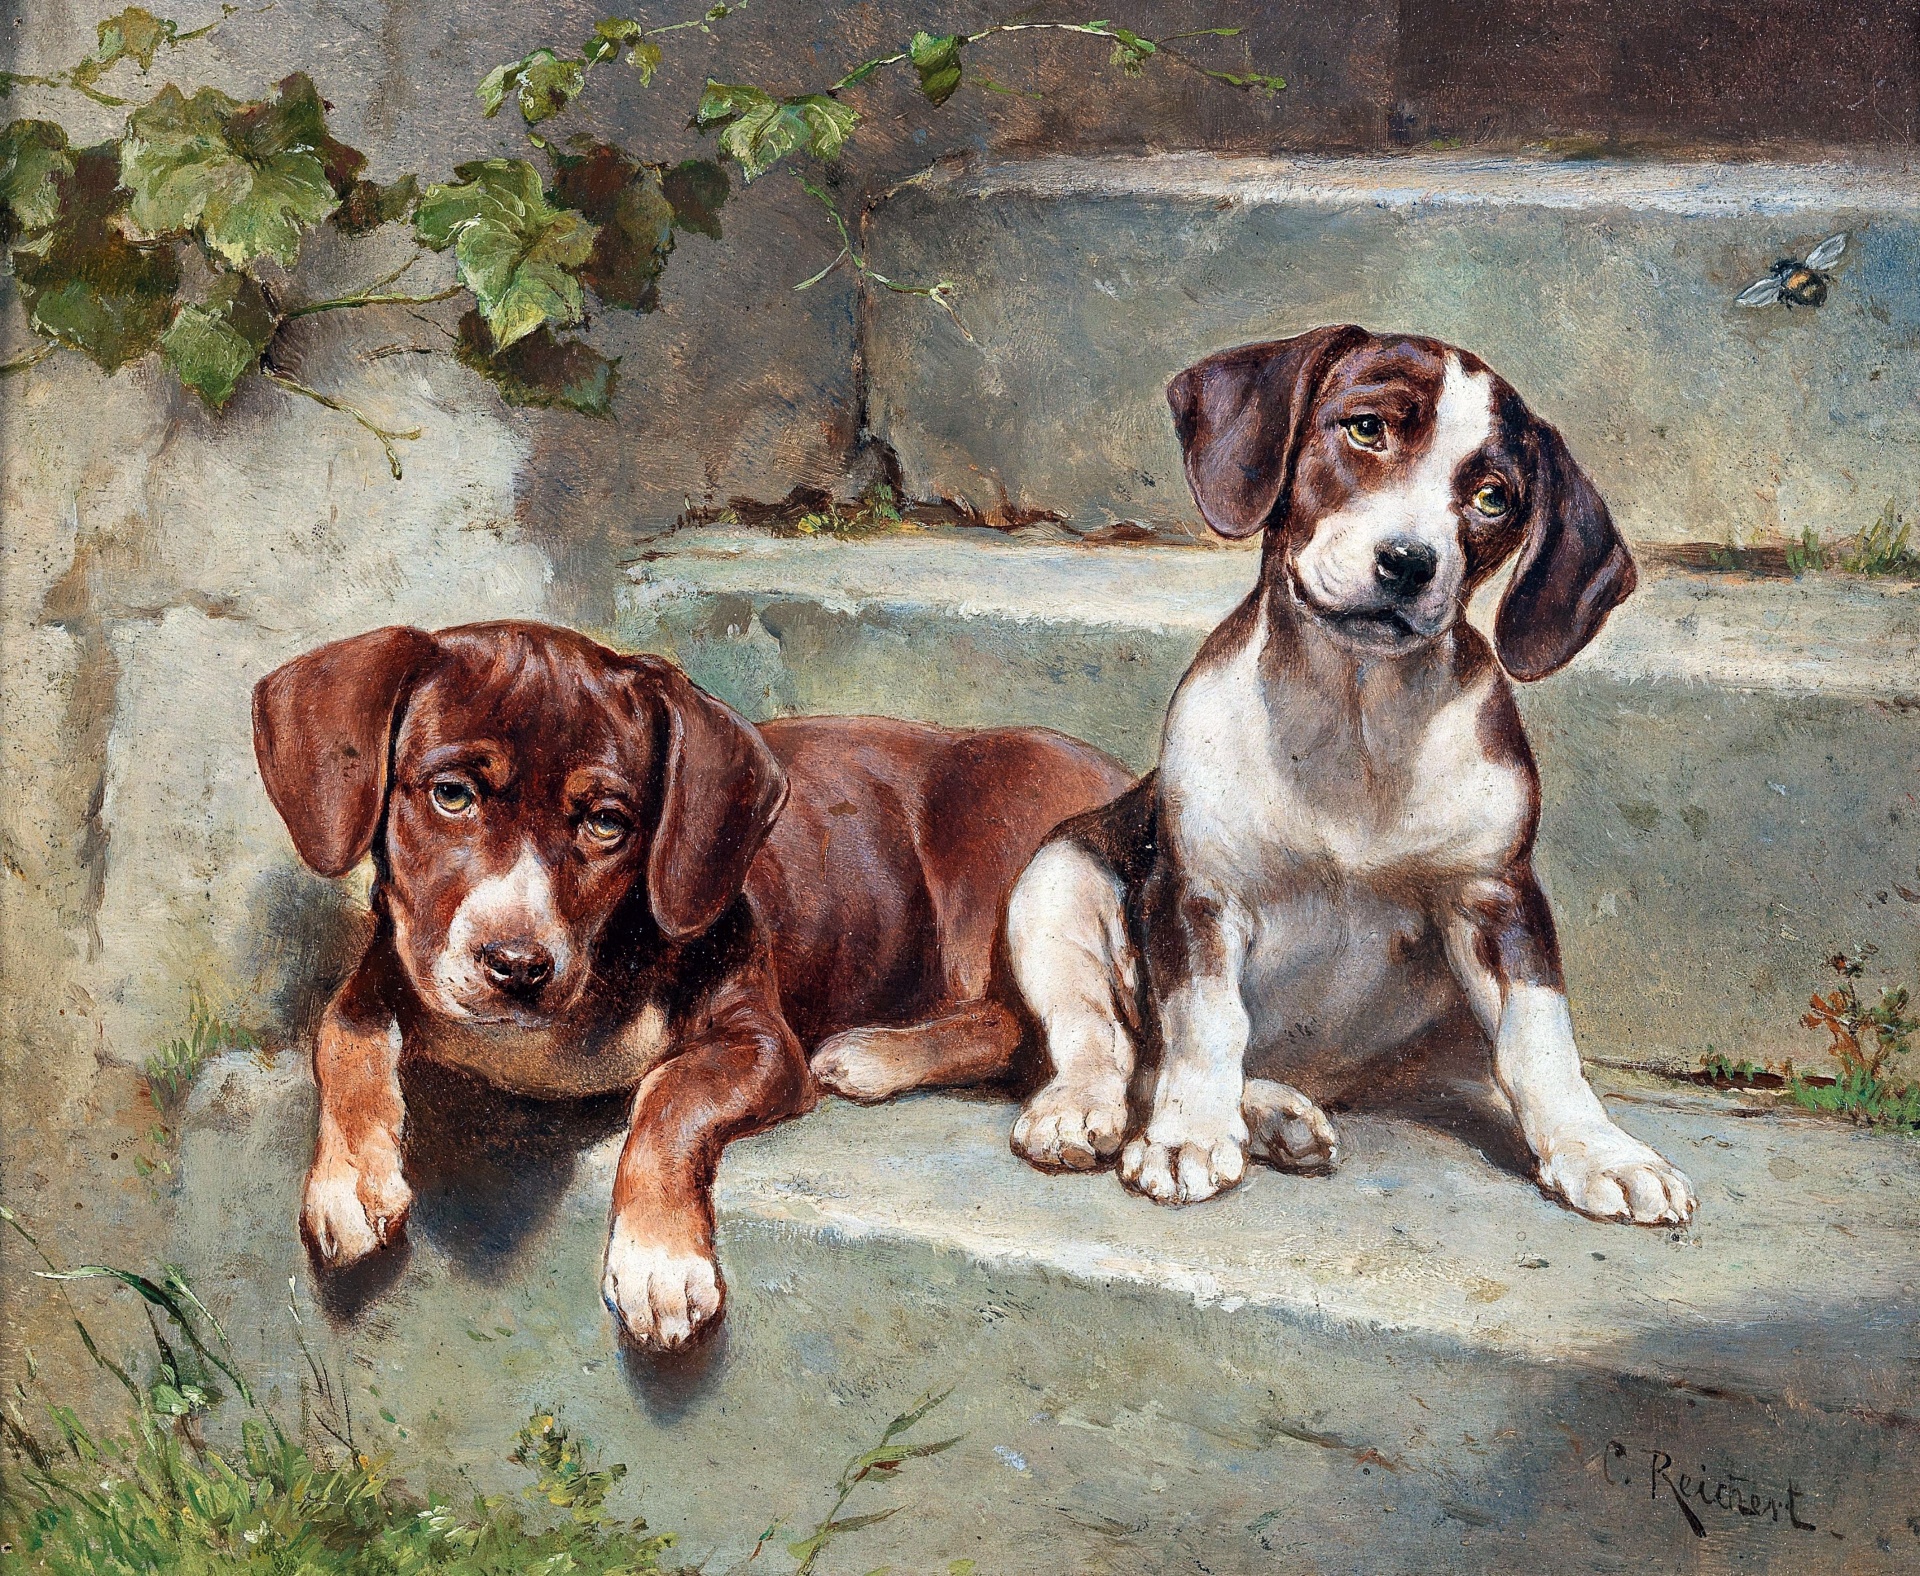 Dogs Puppies Beagle Vintage illustration old antique painting painting by Reichert from 1889